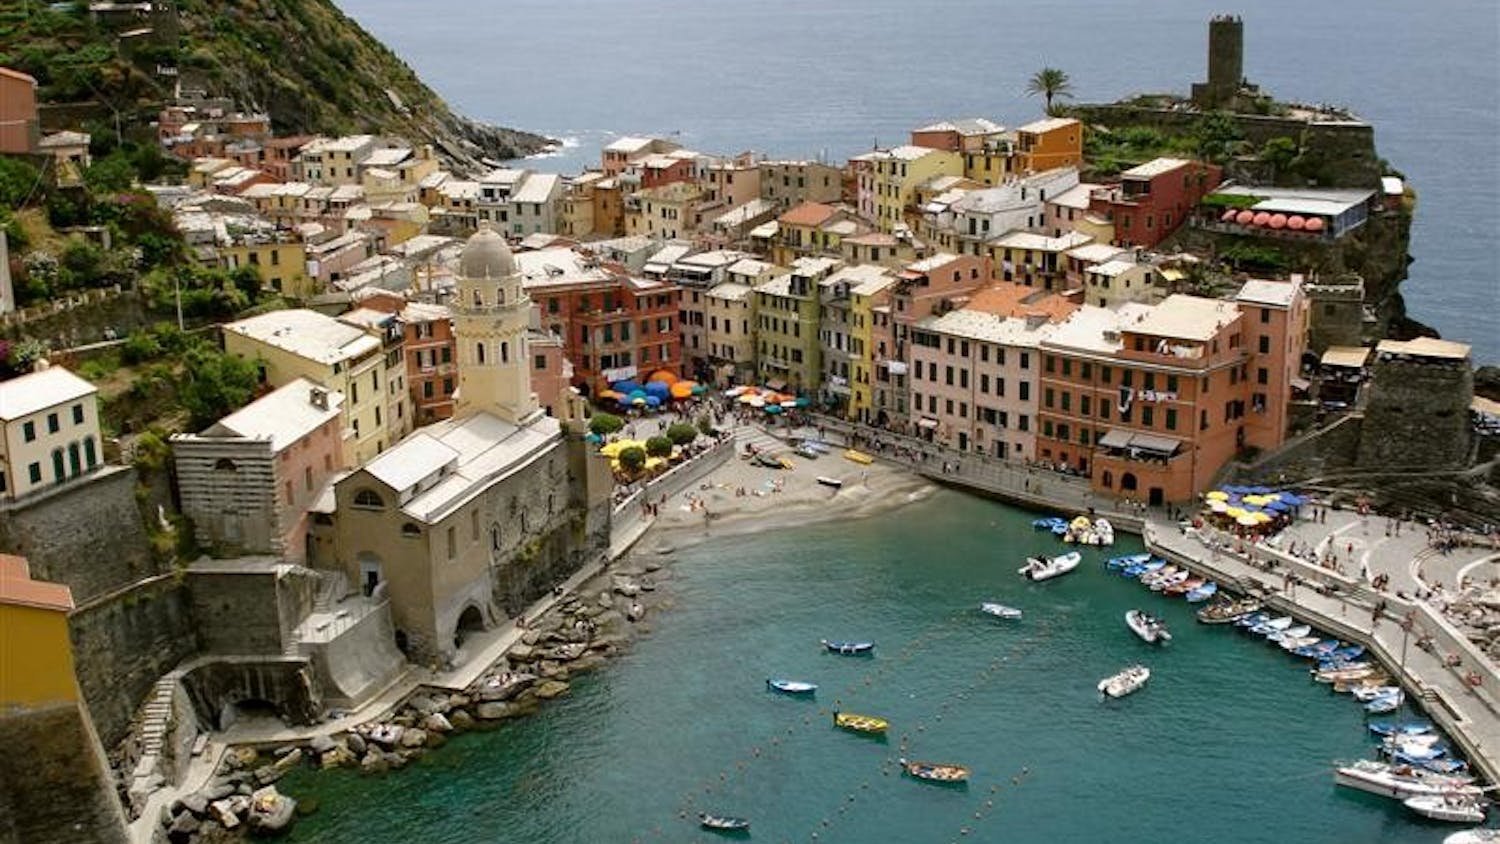 The town of Vernazza, seen from the cliffs along Cinque Terre, a seven-mile hiking trail that encompasses five towns along the Italian coast.